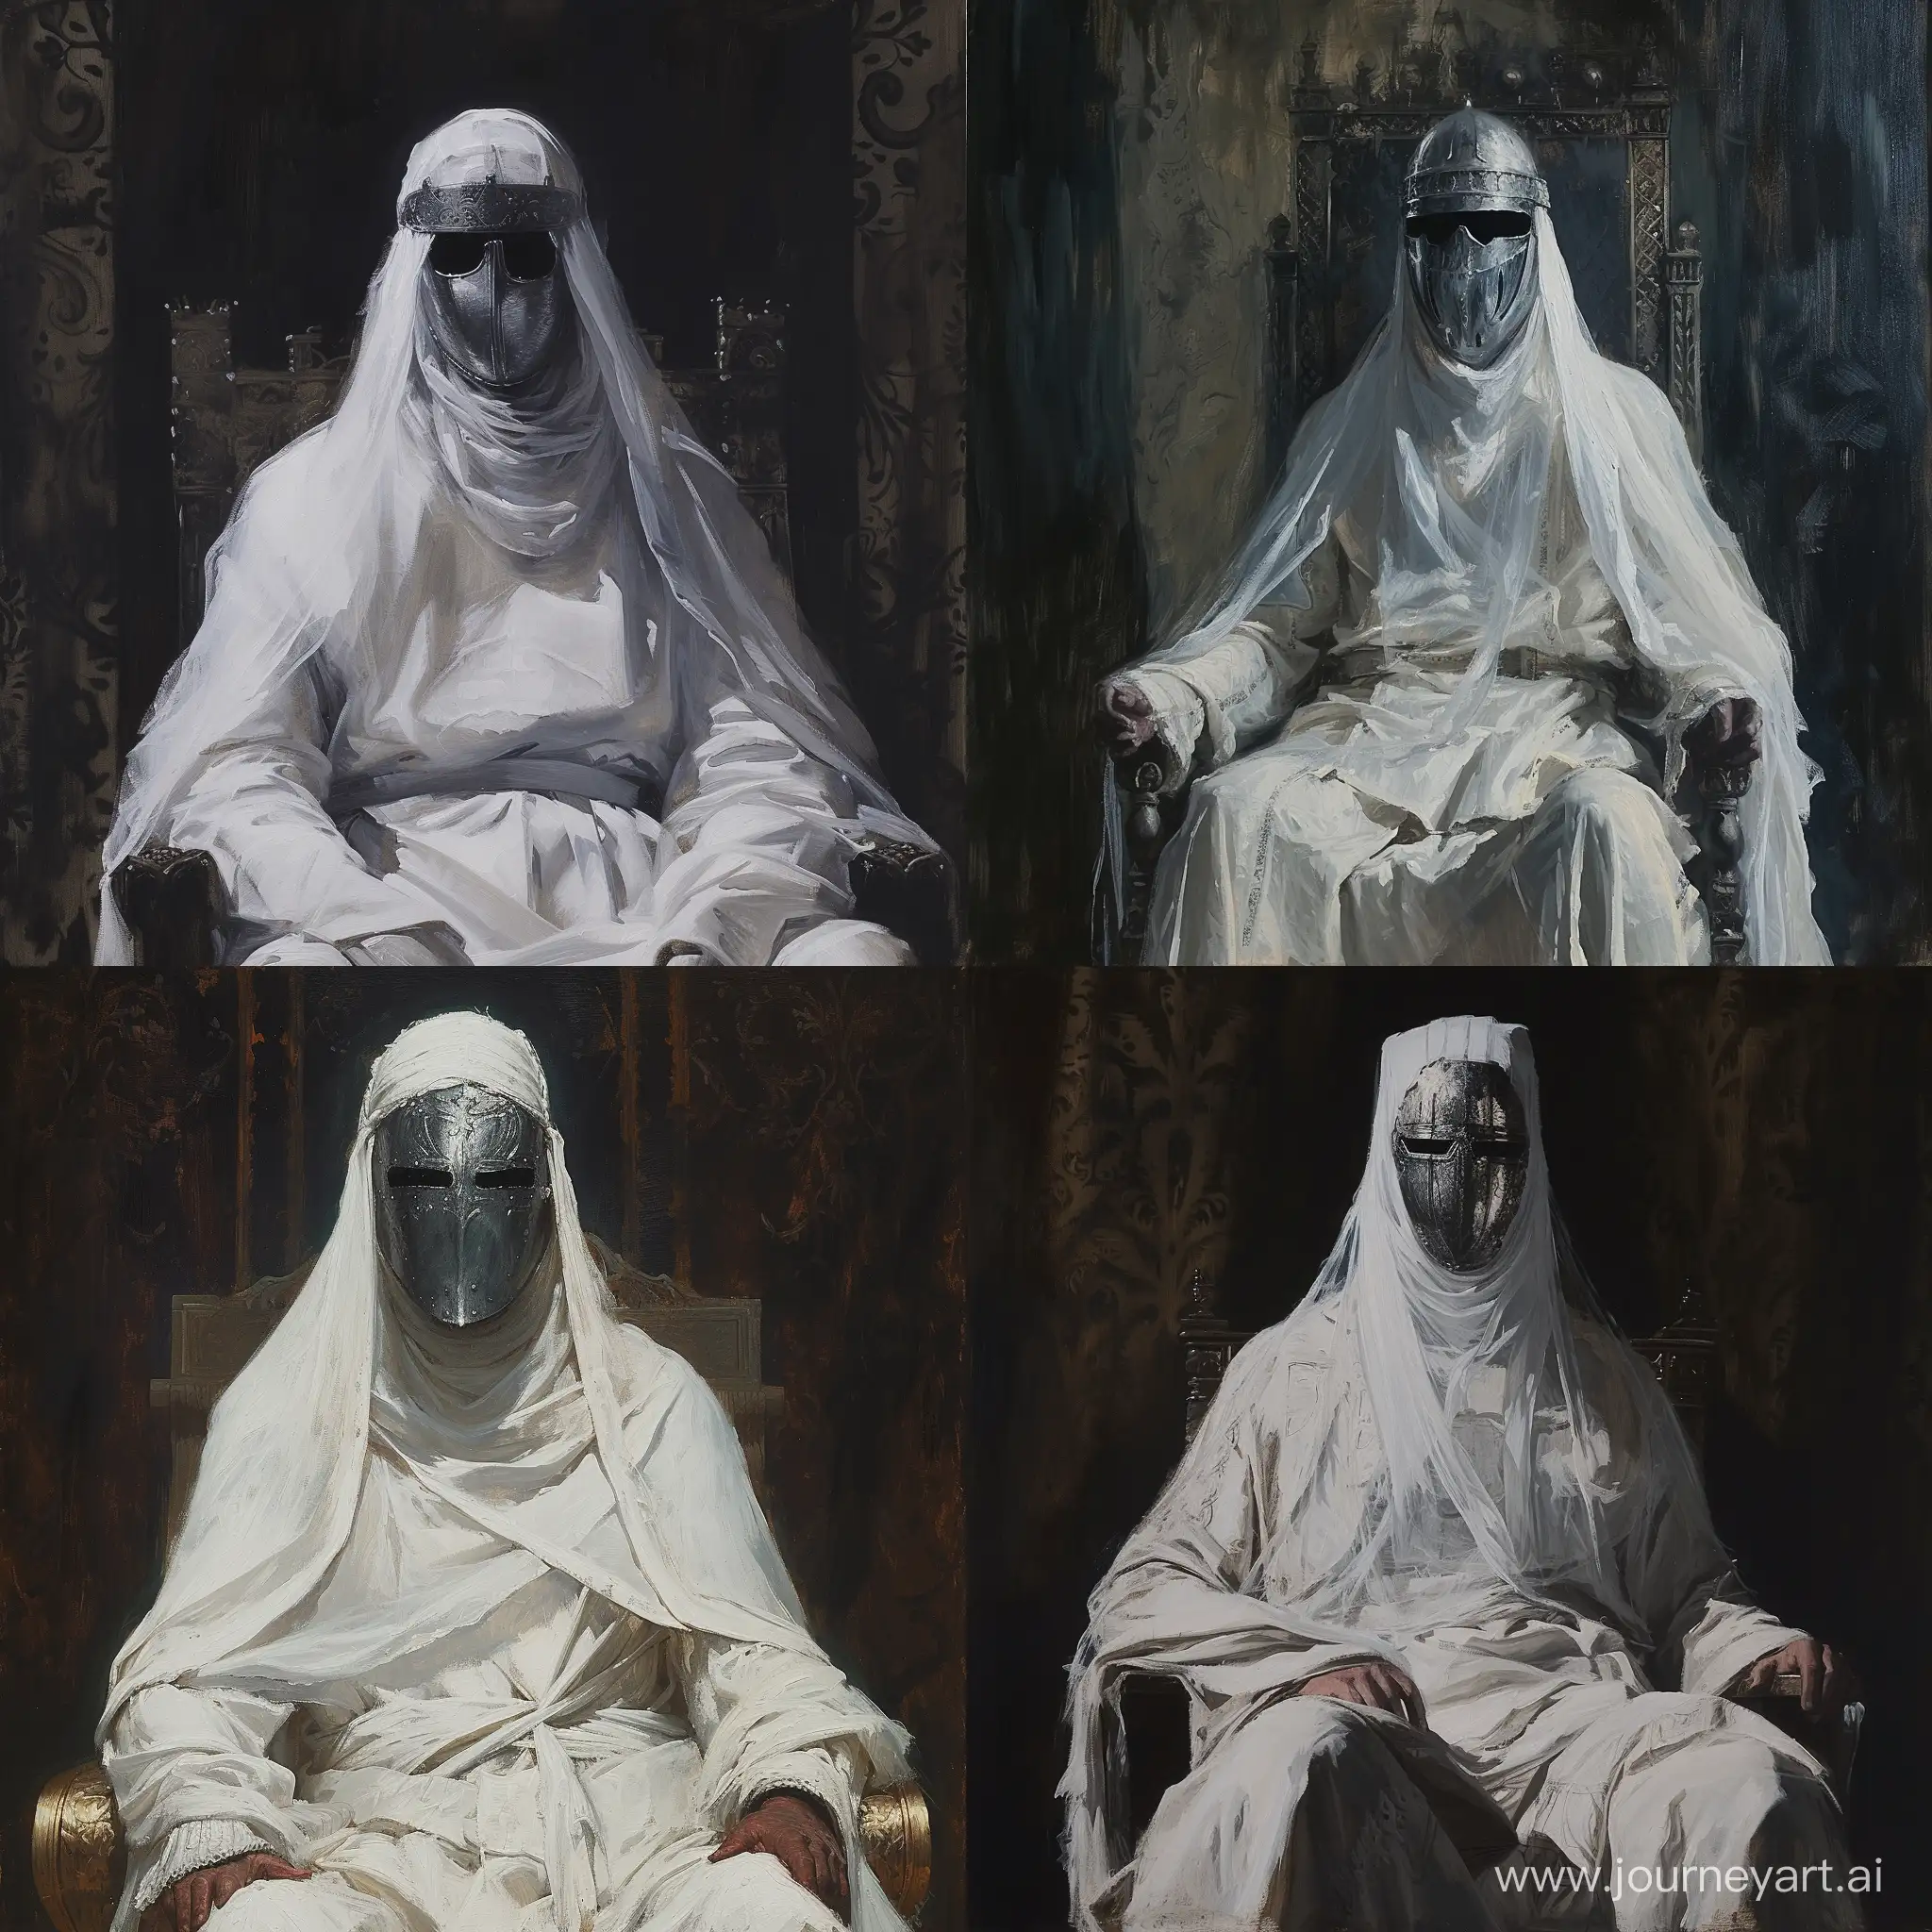 Dark oil painting of Baldwin IV of Jerusalem. He is wearing a face covering silver mask, white attire and white veil. Sitting on throne. Dark color brush strikes oil painting.